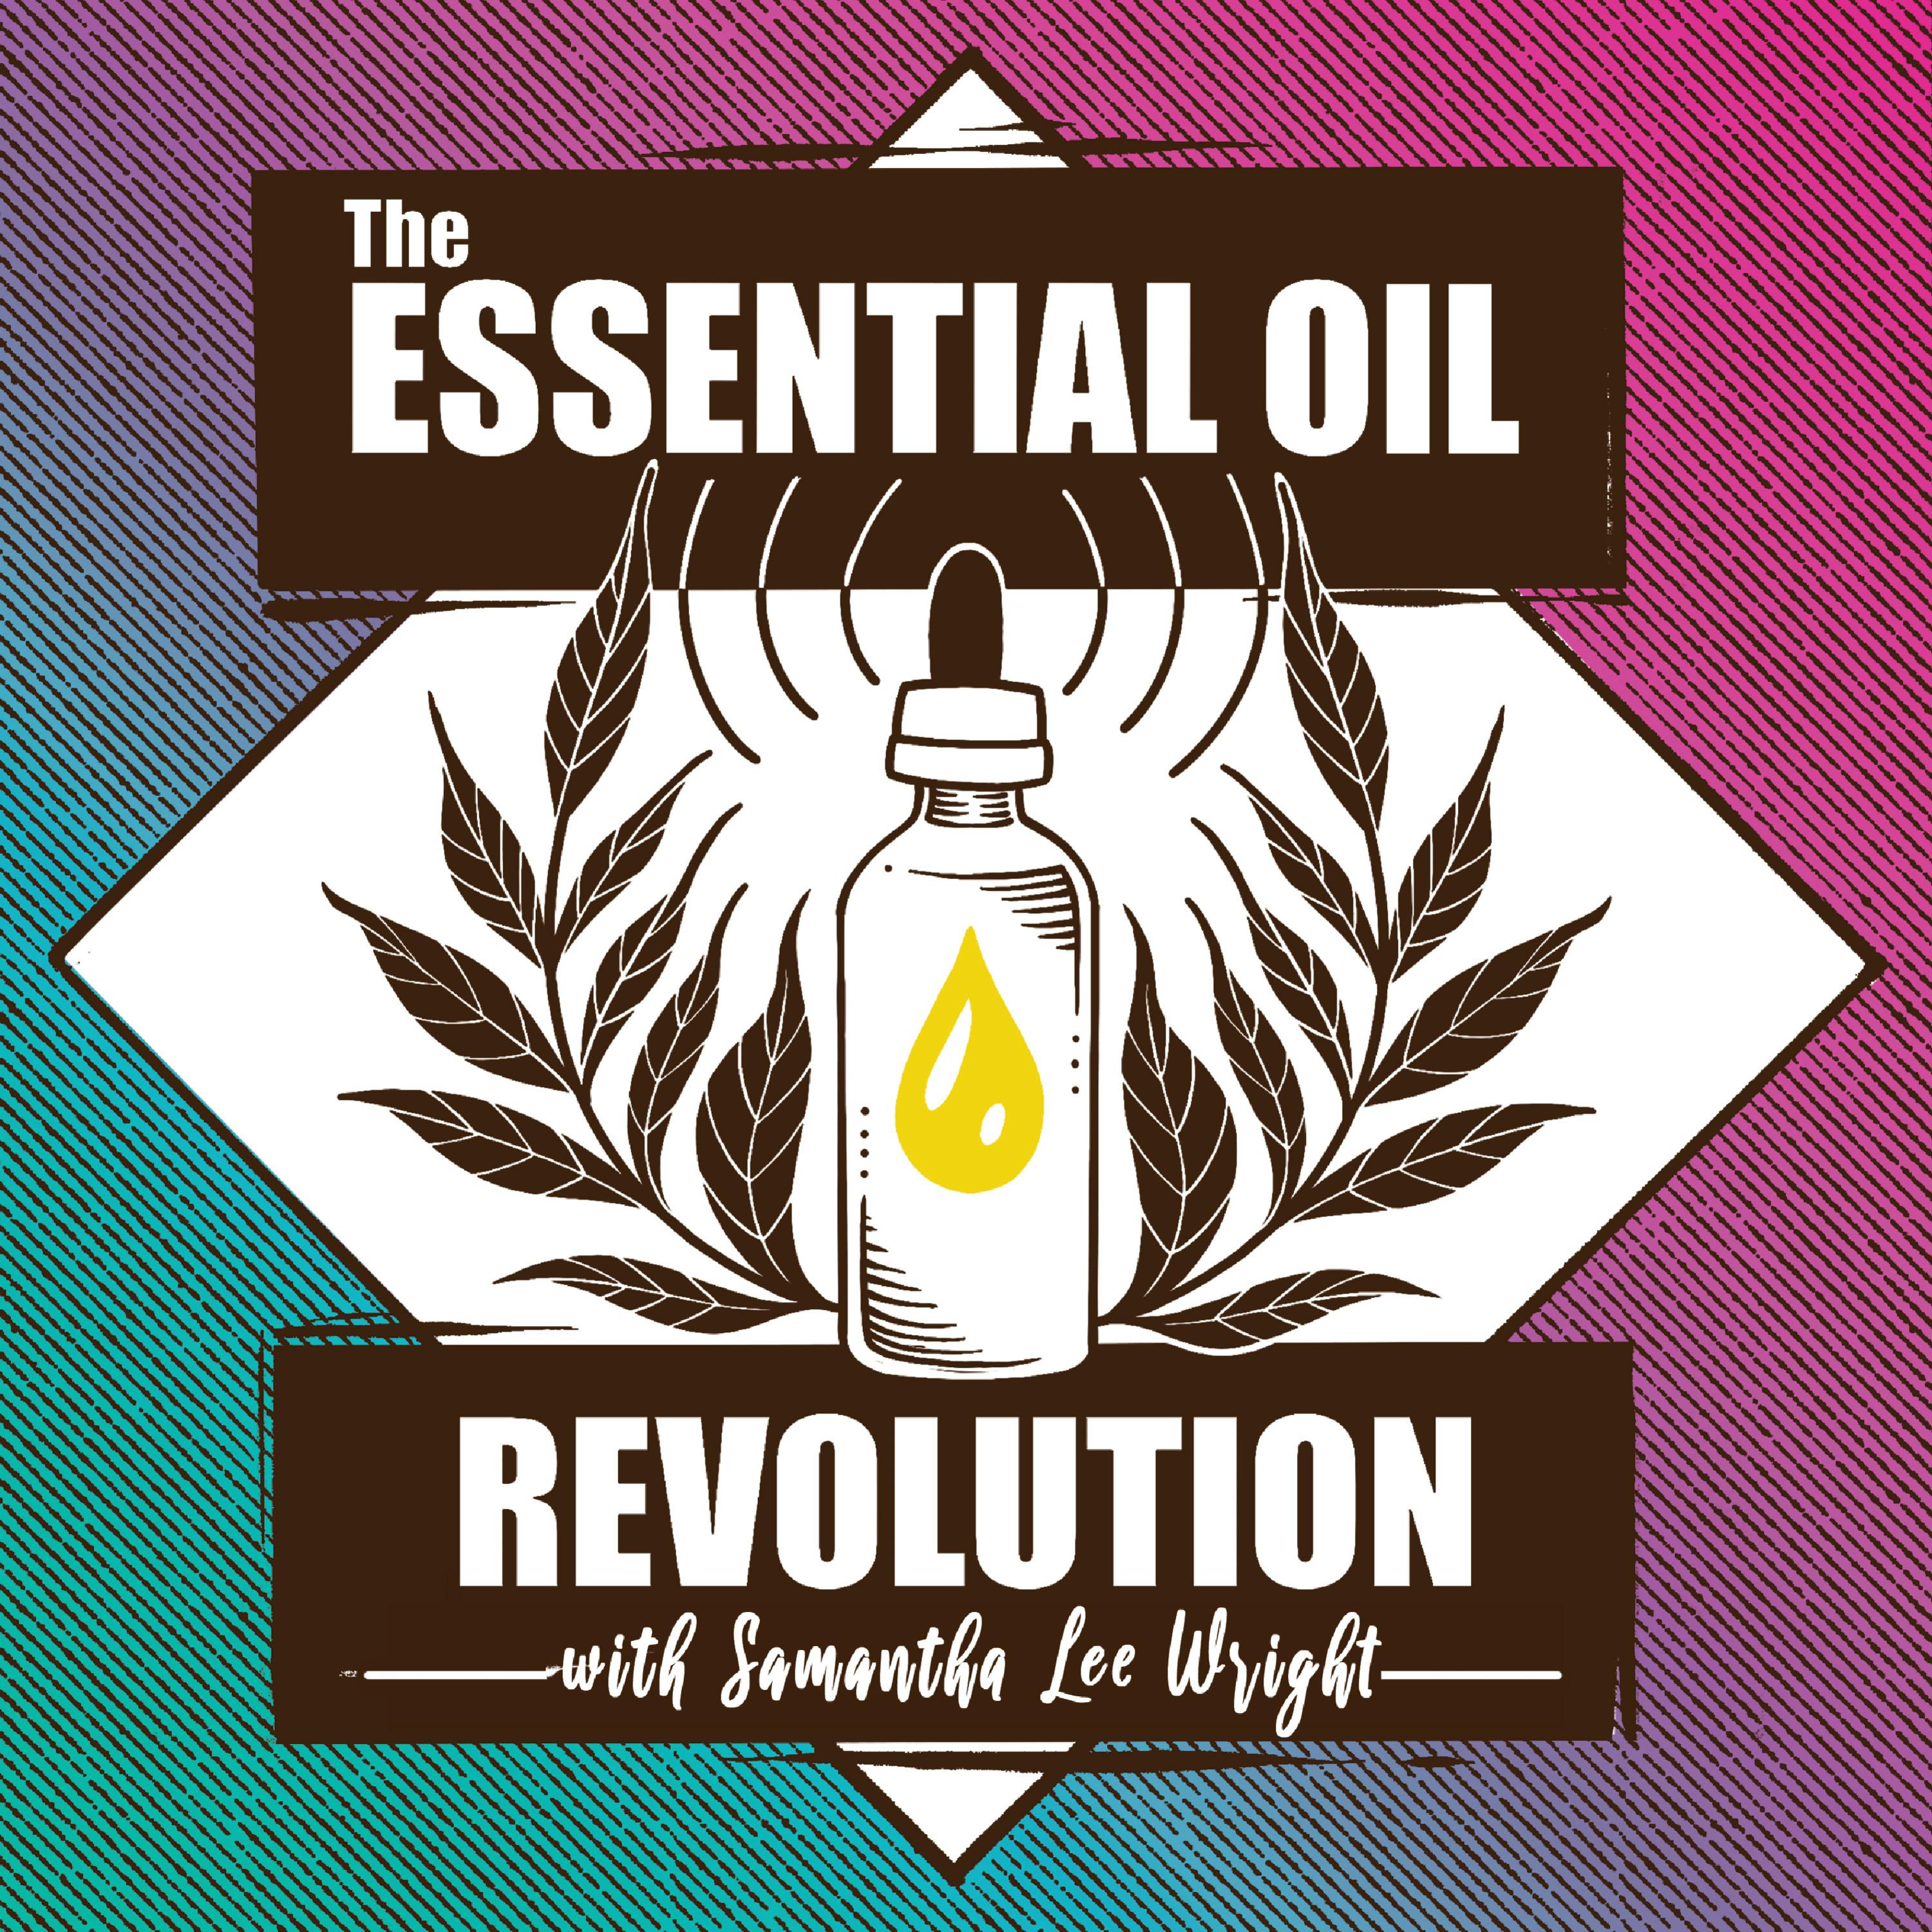 285: Essential Oil Solutions for Every Cycle of Life w/ Dr. Lindsey Elmore